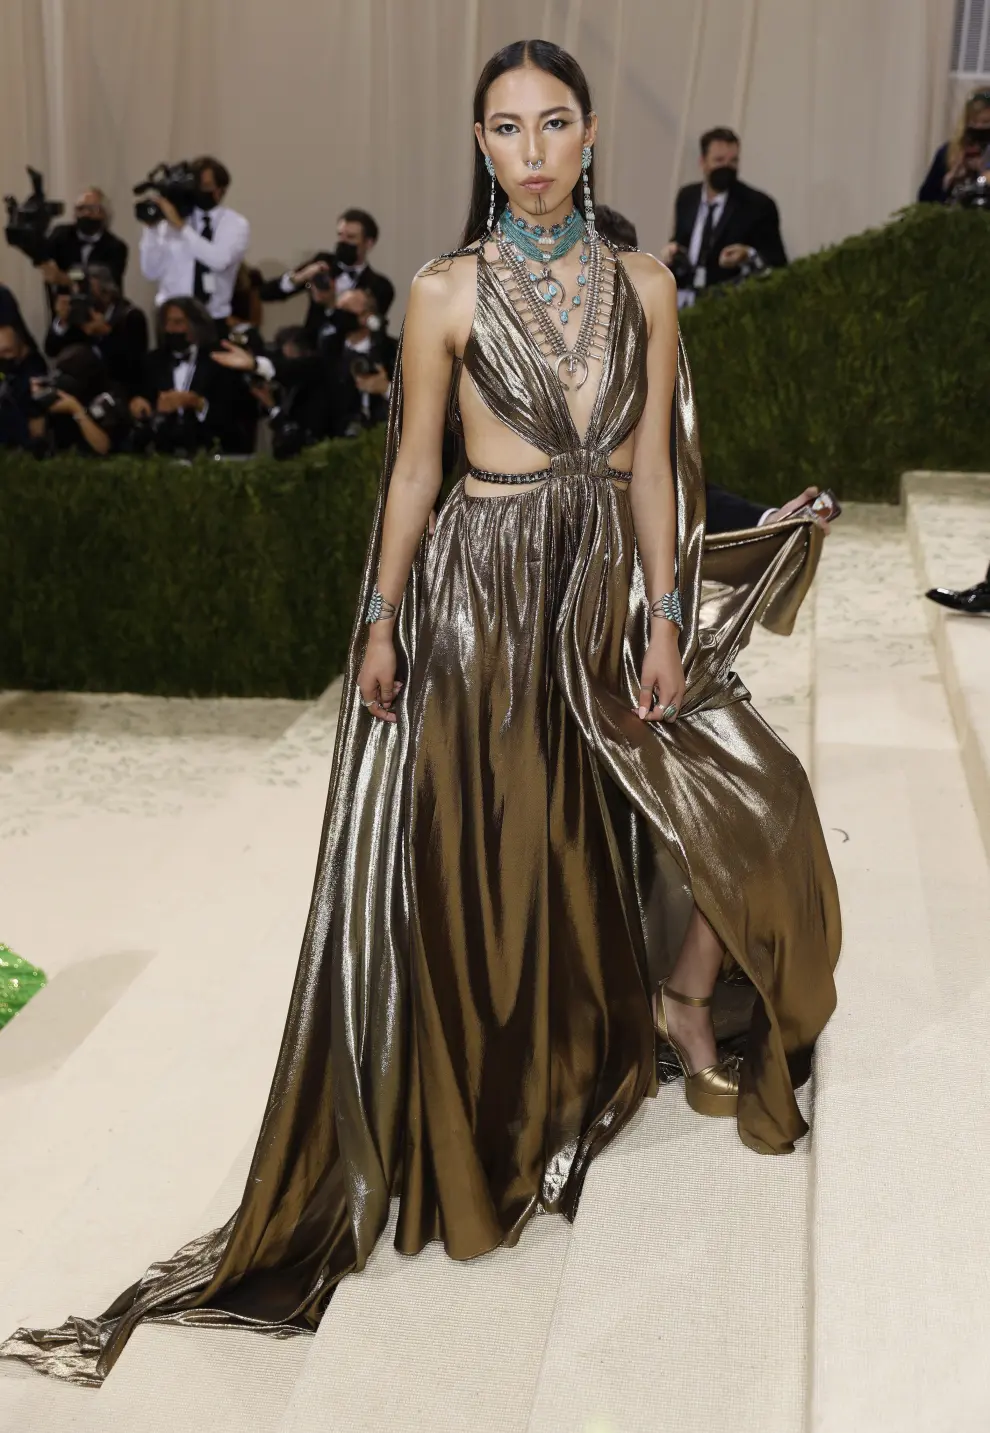 New York (United States), 13/09/2021.- Kehlani poses on the red carpet for the 2021 Met Gala, the annual benefit for the Metropolitan Museum of Art's Costume Institute, in New York, New York, USA, 13 September 2021. The event coincides with the Met Costume Institute's first two-part exhibition, 'In America: A Lexicon of Fashion' which opens 18 September 2021, to be followed by 'In America: An Anthology of Fashion' which opens 05 May 2022 and both conclude 05 September 2022. (Moda, Abierto, Estados Unidos, Nueva York) EFE/EPA/JUSTIN LANE
 USA NEW YORK MET GALA